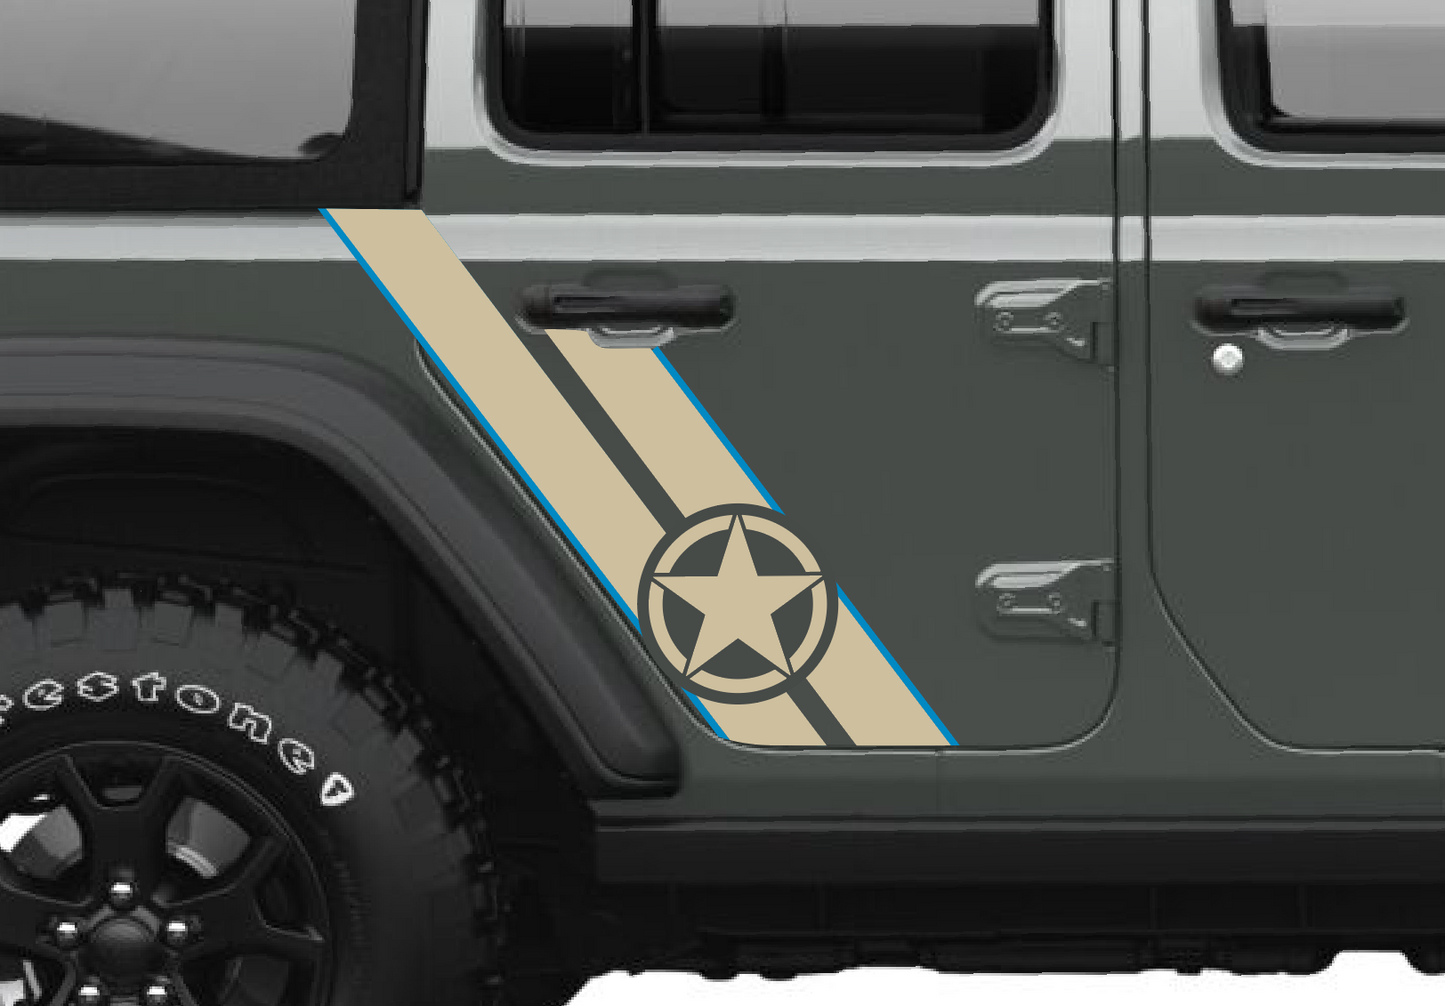 Army Star Double Stripe Color Line Rubicon Blackout Decal Set- fits 2018 and Newer Jeep Wrangler & 2020+ Gladiator